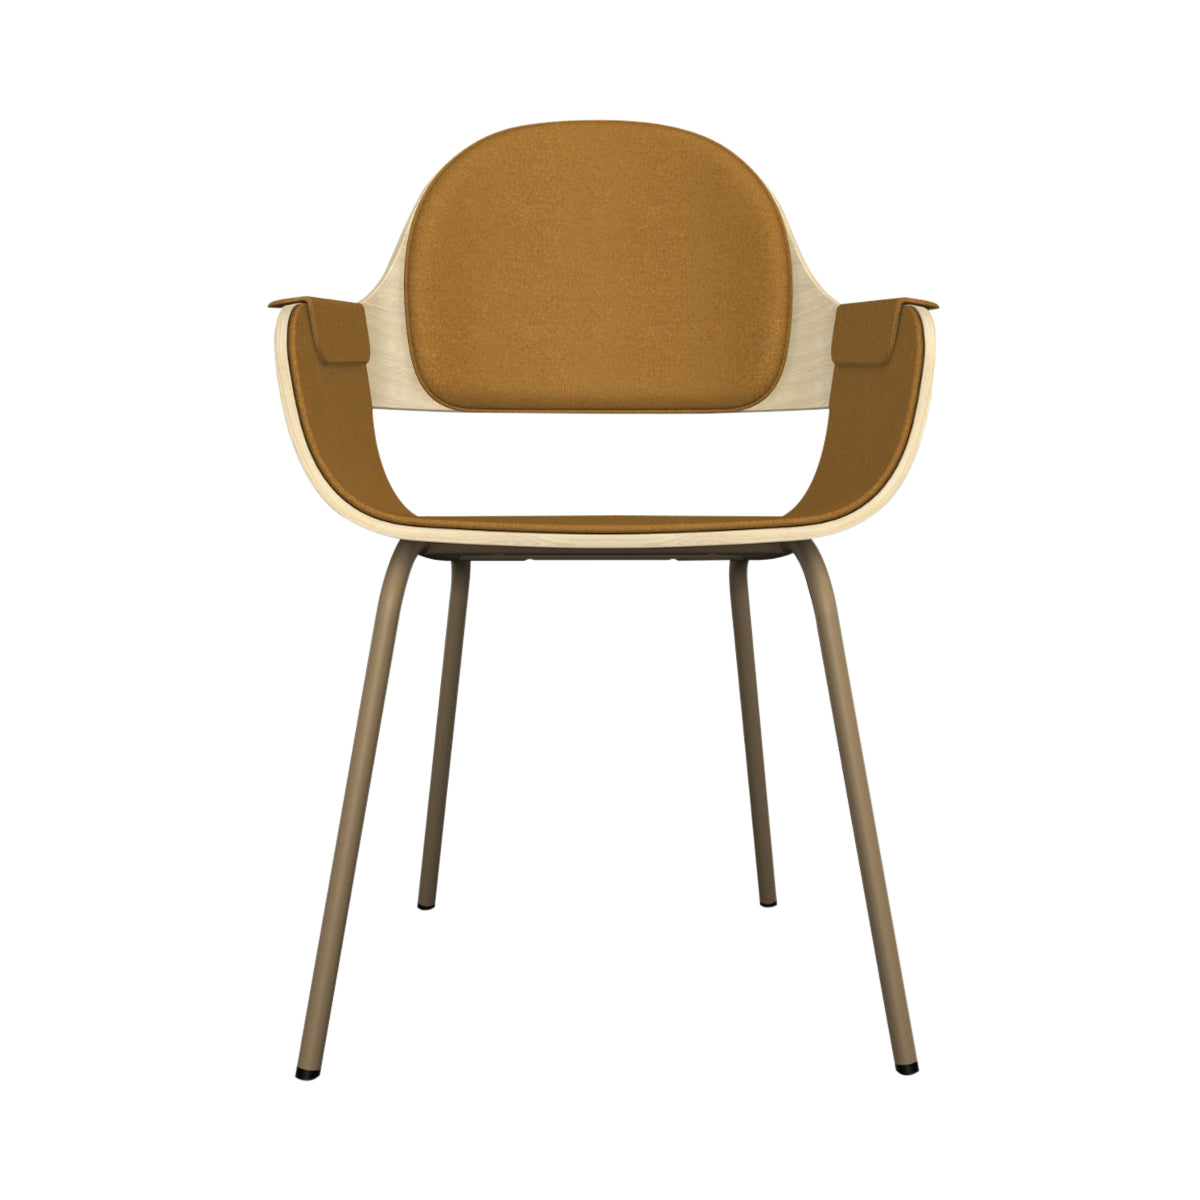 Showtime Nude Chair with Metal Base: Interior Seat + Armrest + Backrest Cushion + Natural Ash + Beige